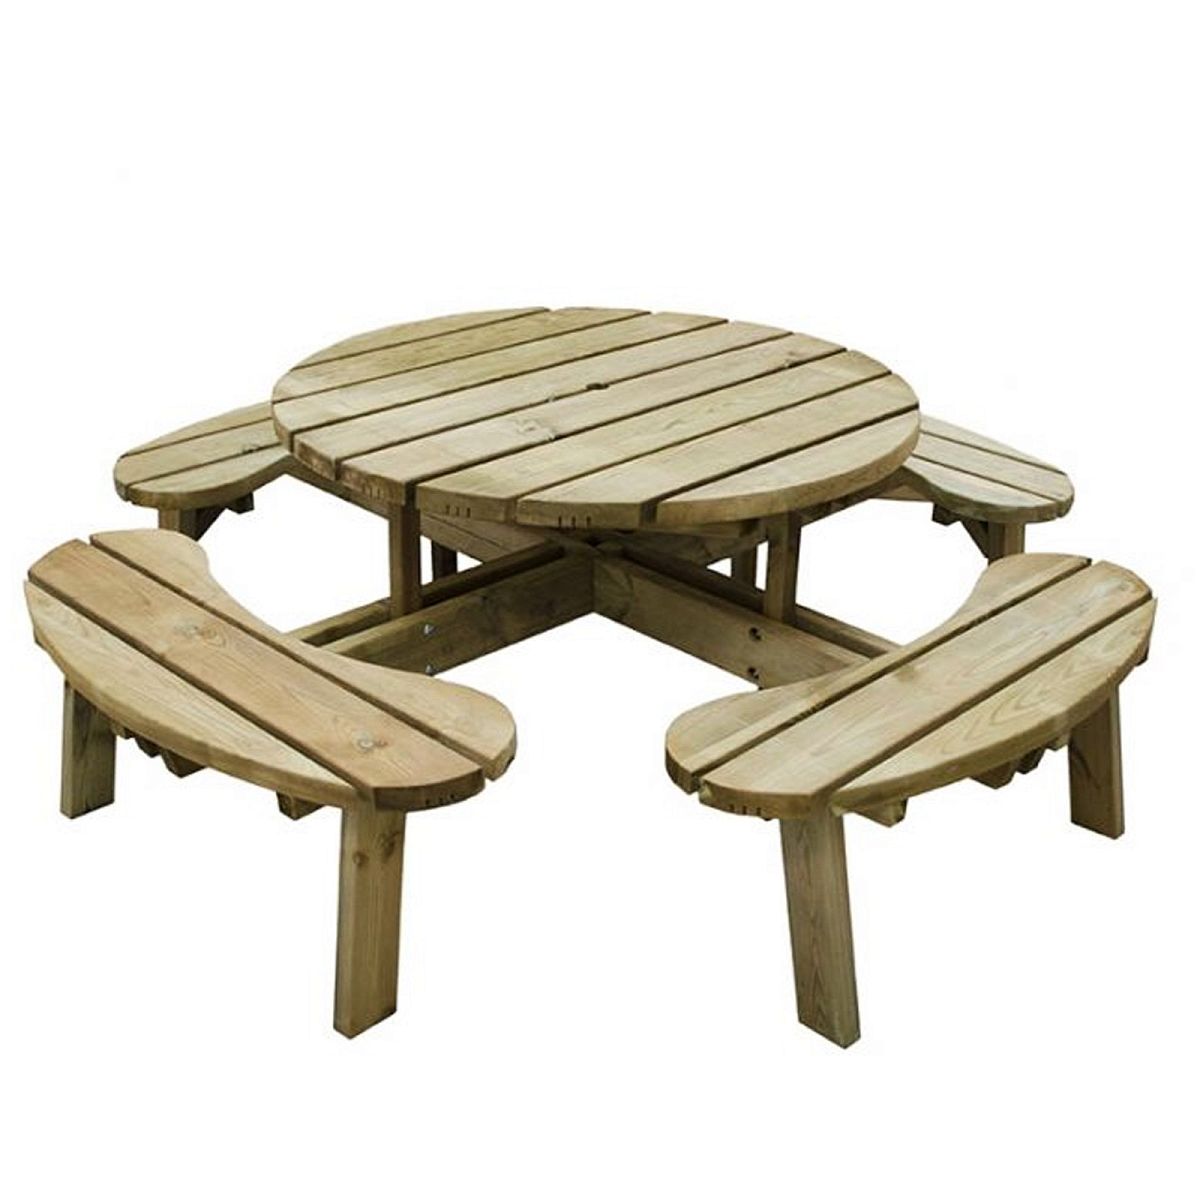 Outdoor Wooden Round Picnic Table by Forest Garden